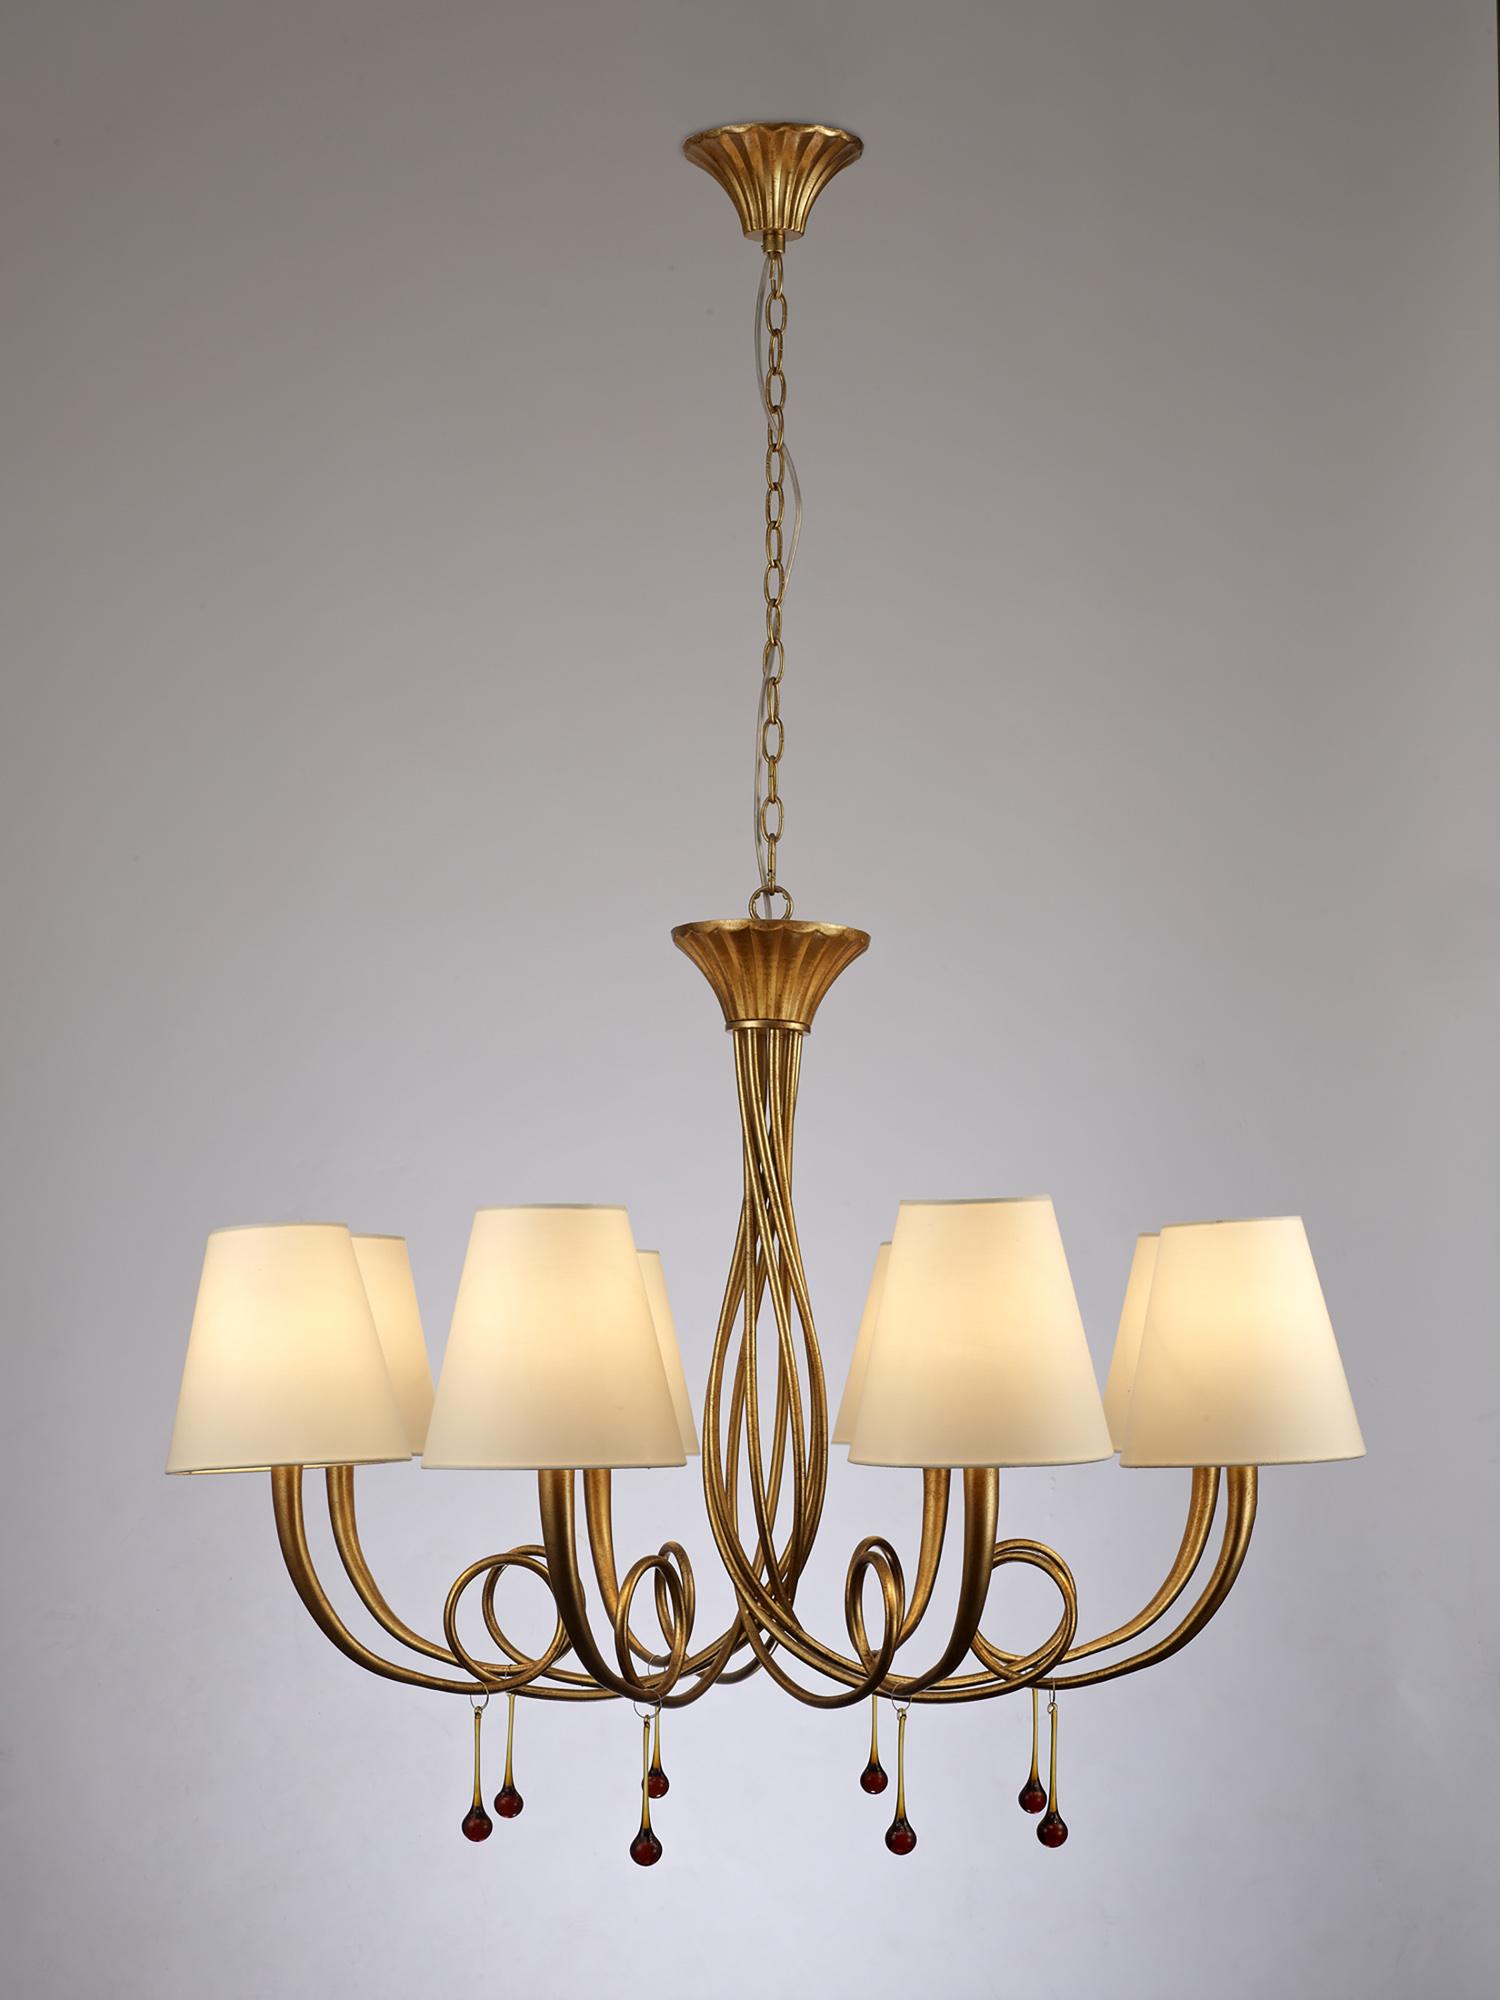 Paola Gold Ceiling Lights Mantra Multi Arm Fittings